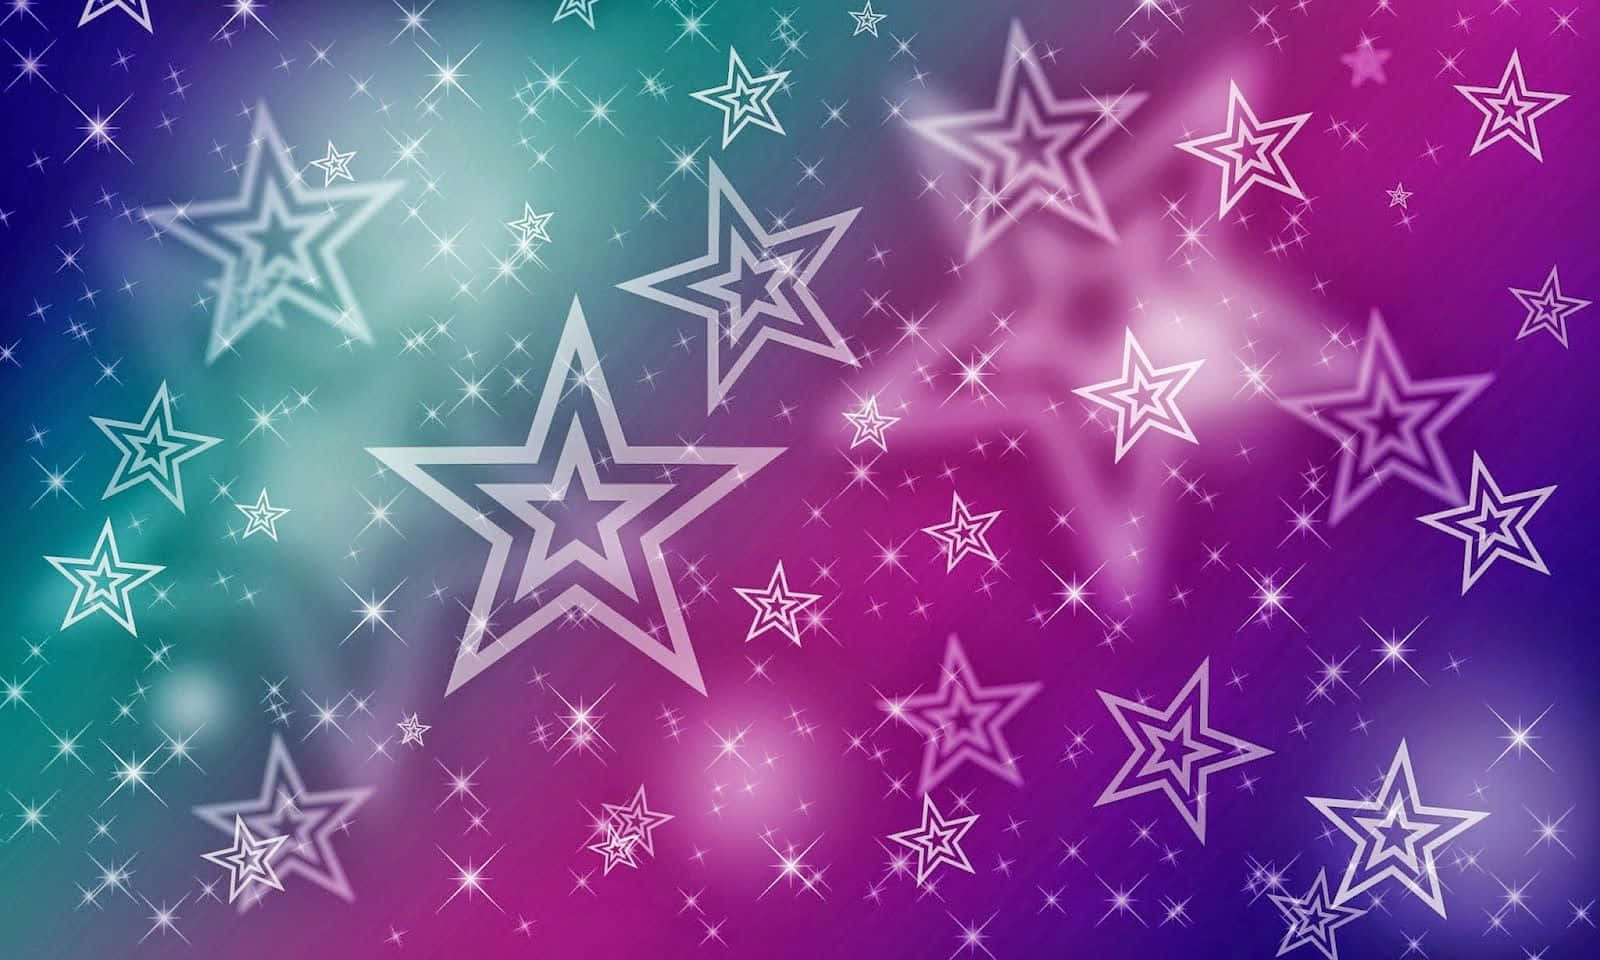 Make a wish upon this Aesthetic Star Wallpaper